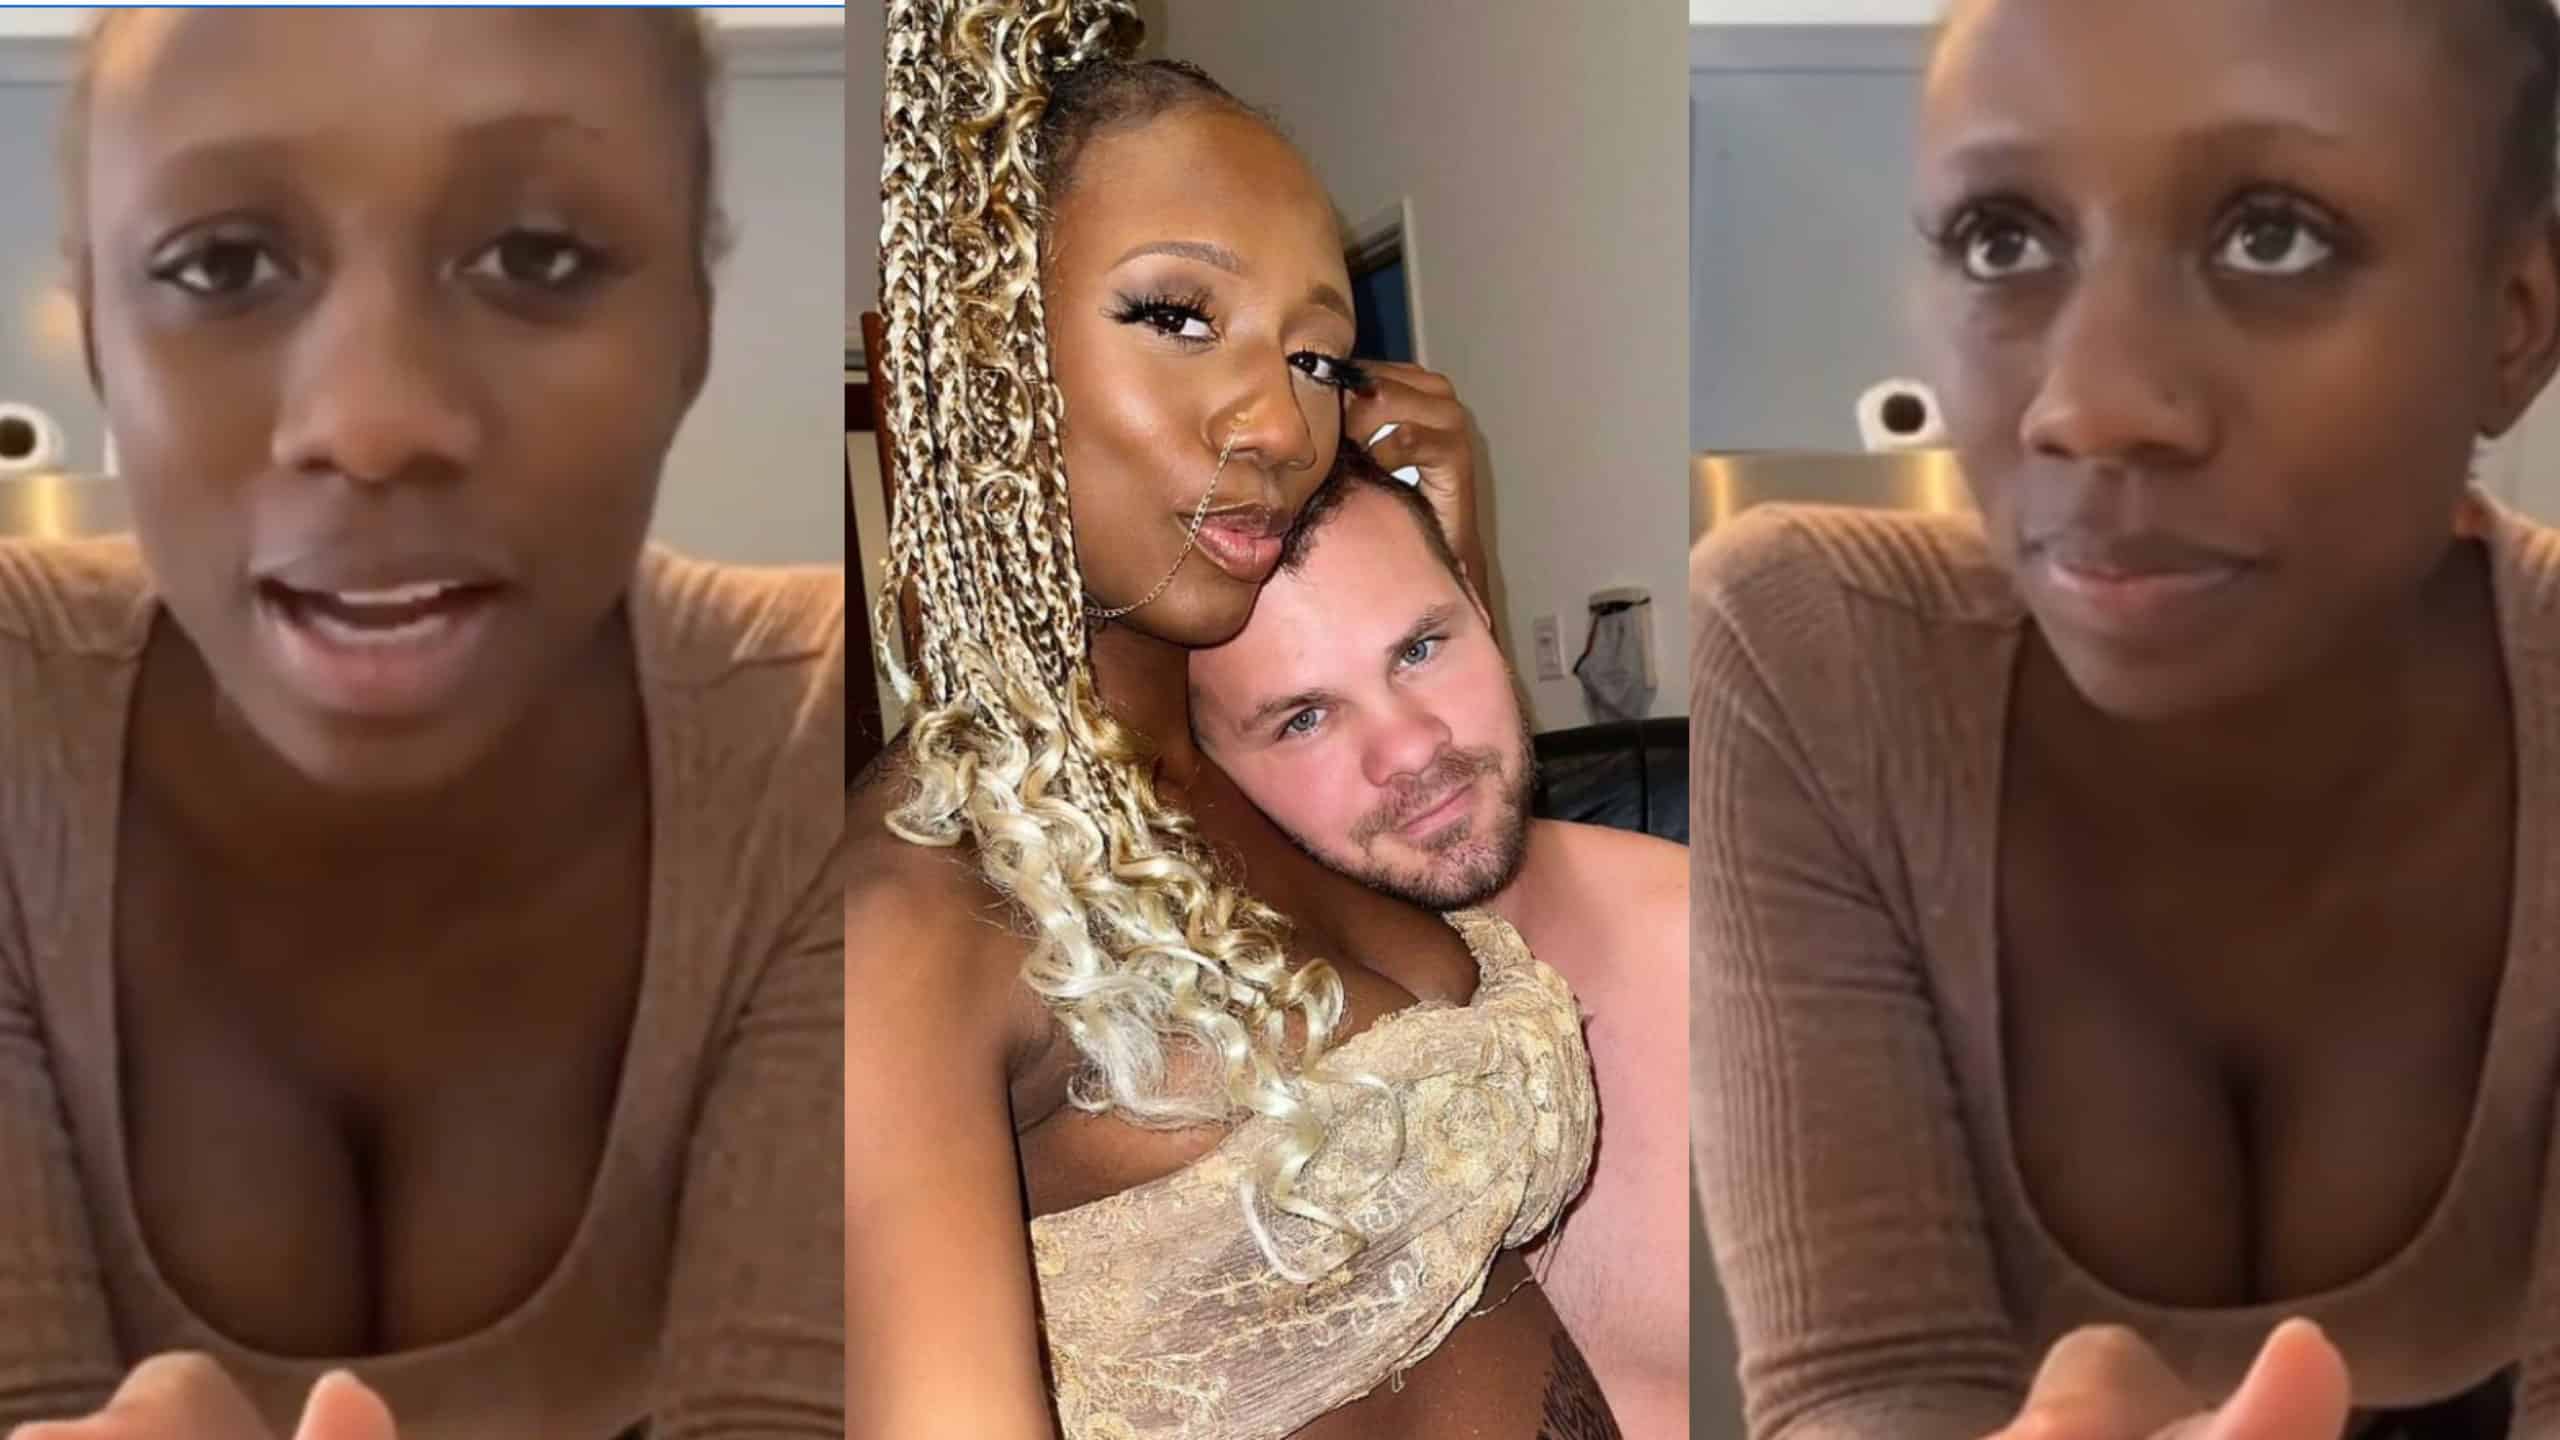 "I will take care of myself and my newborn" - Korra Obidi breaks silence after husband called for divorce [Video]